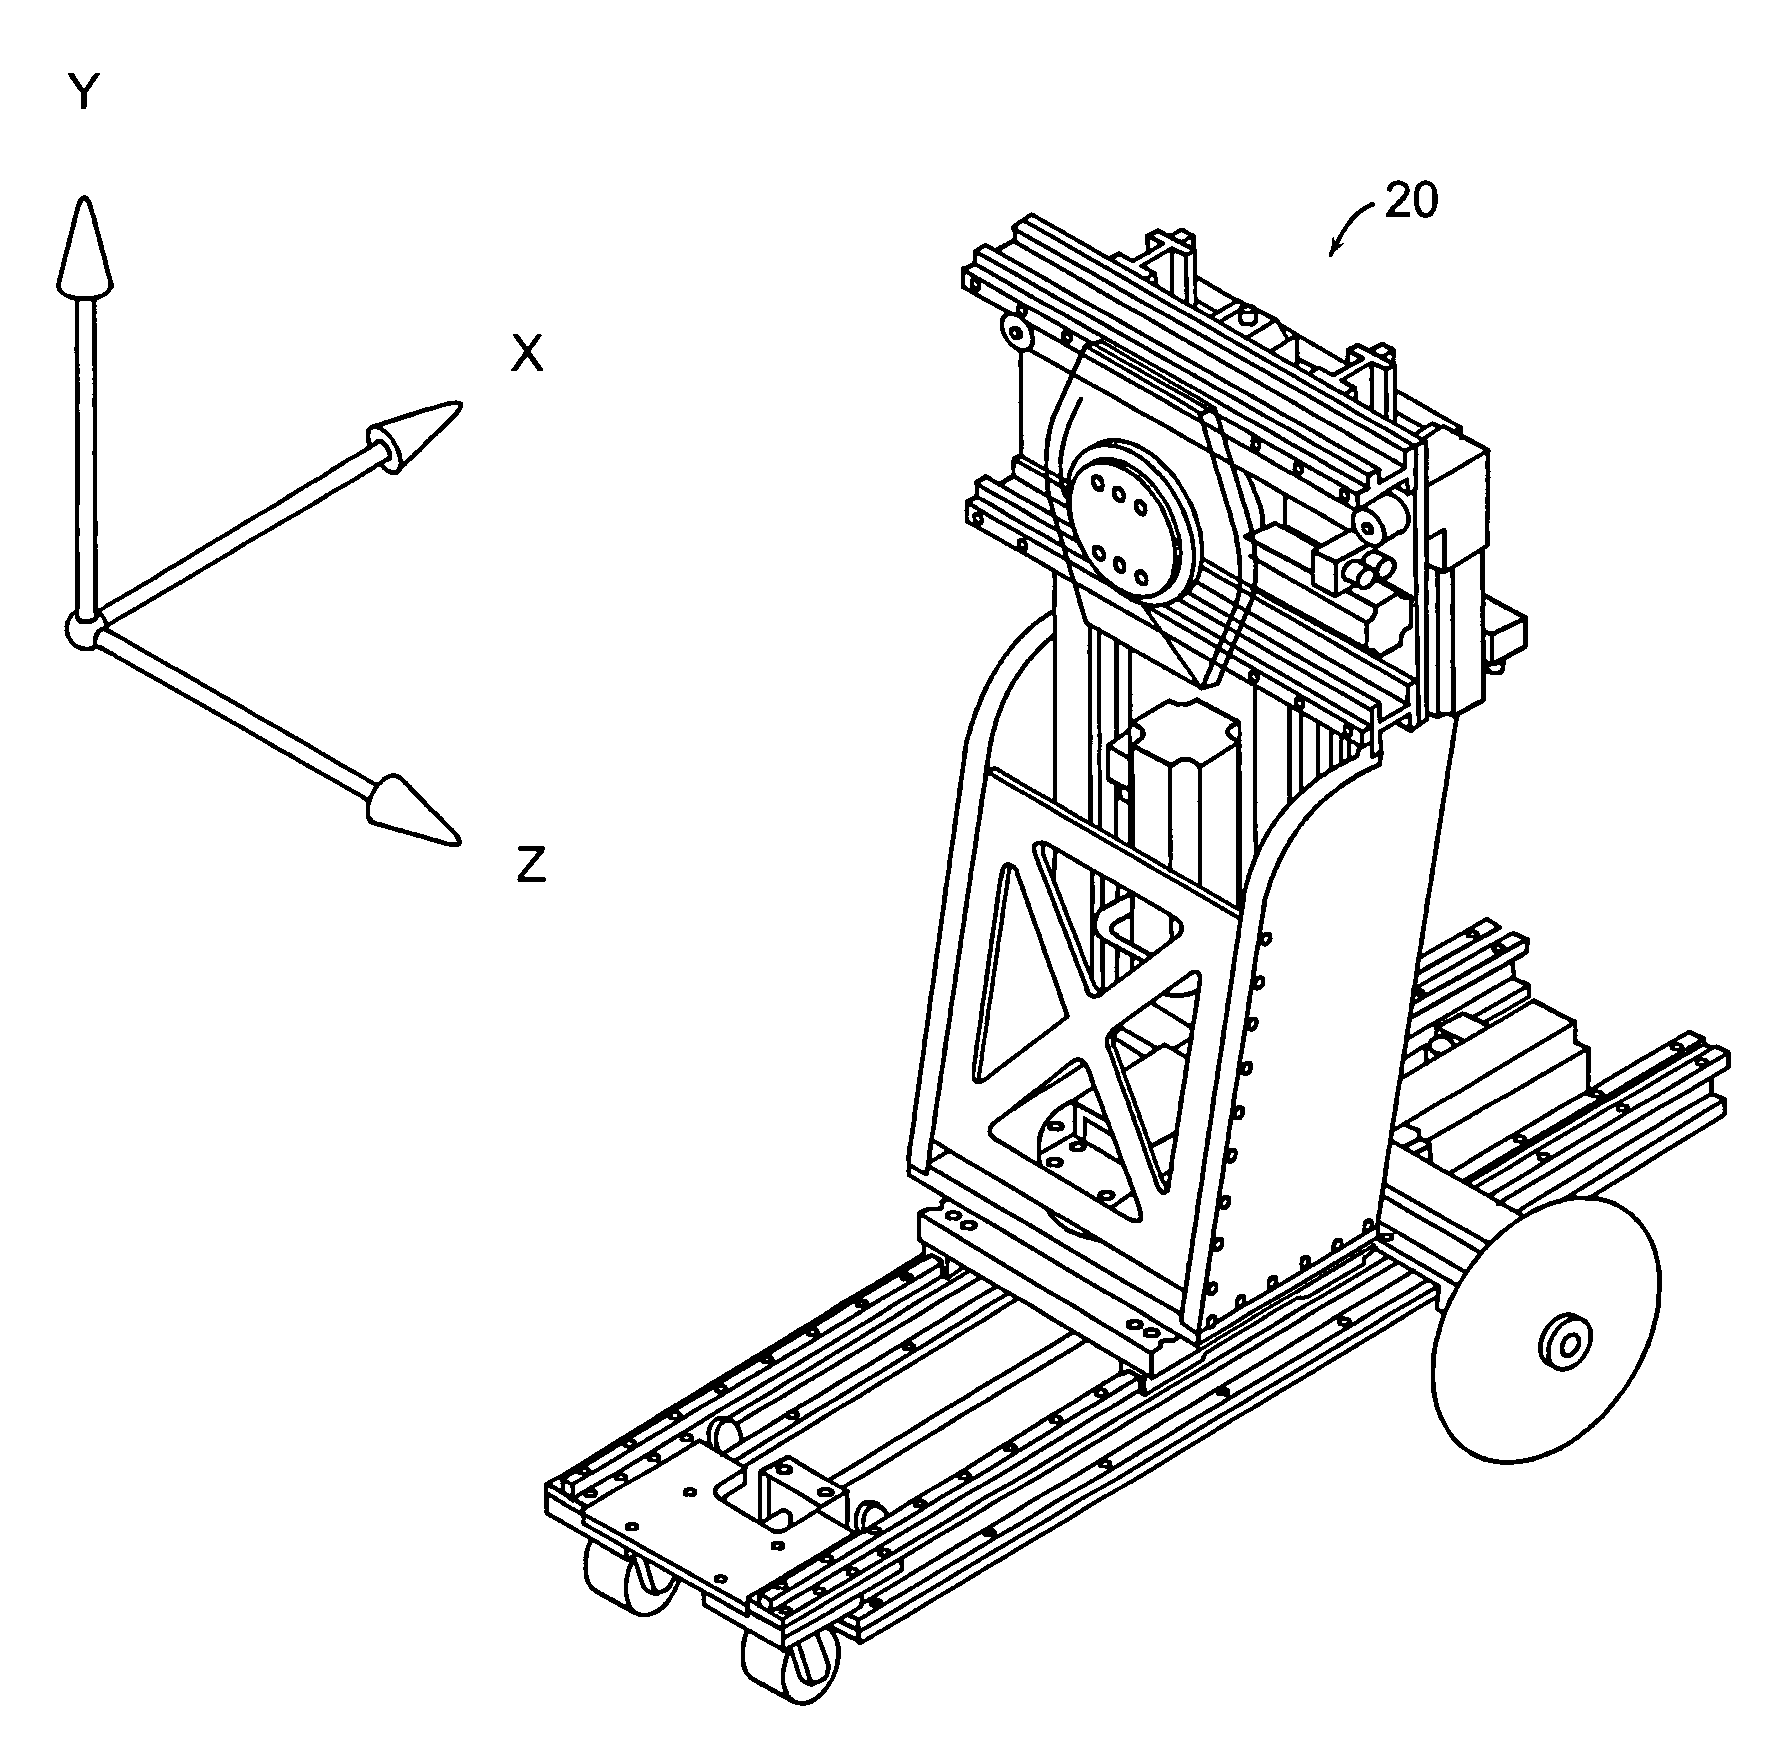 Gantry positioning apparatus for X-ray imaging